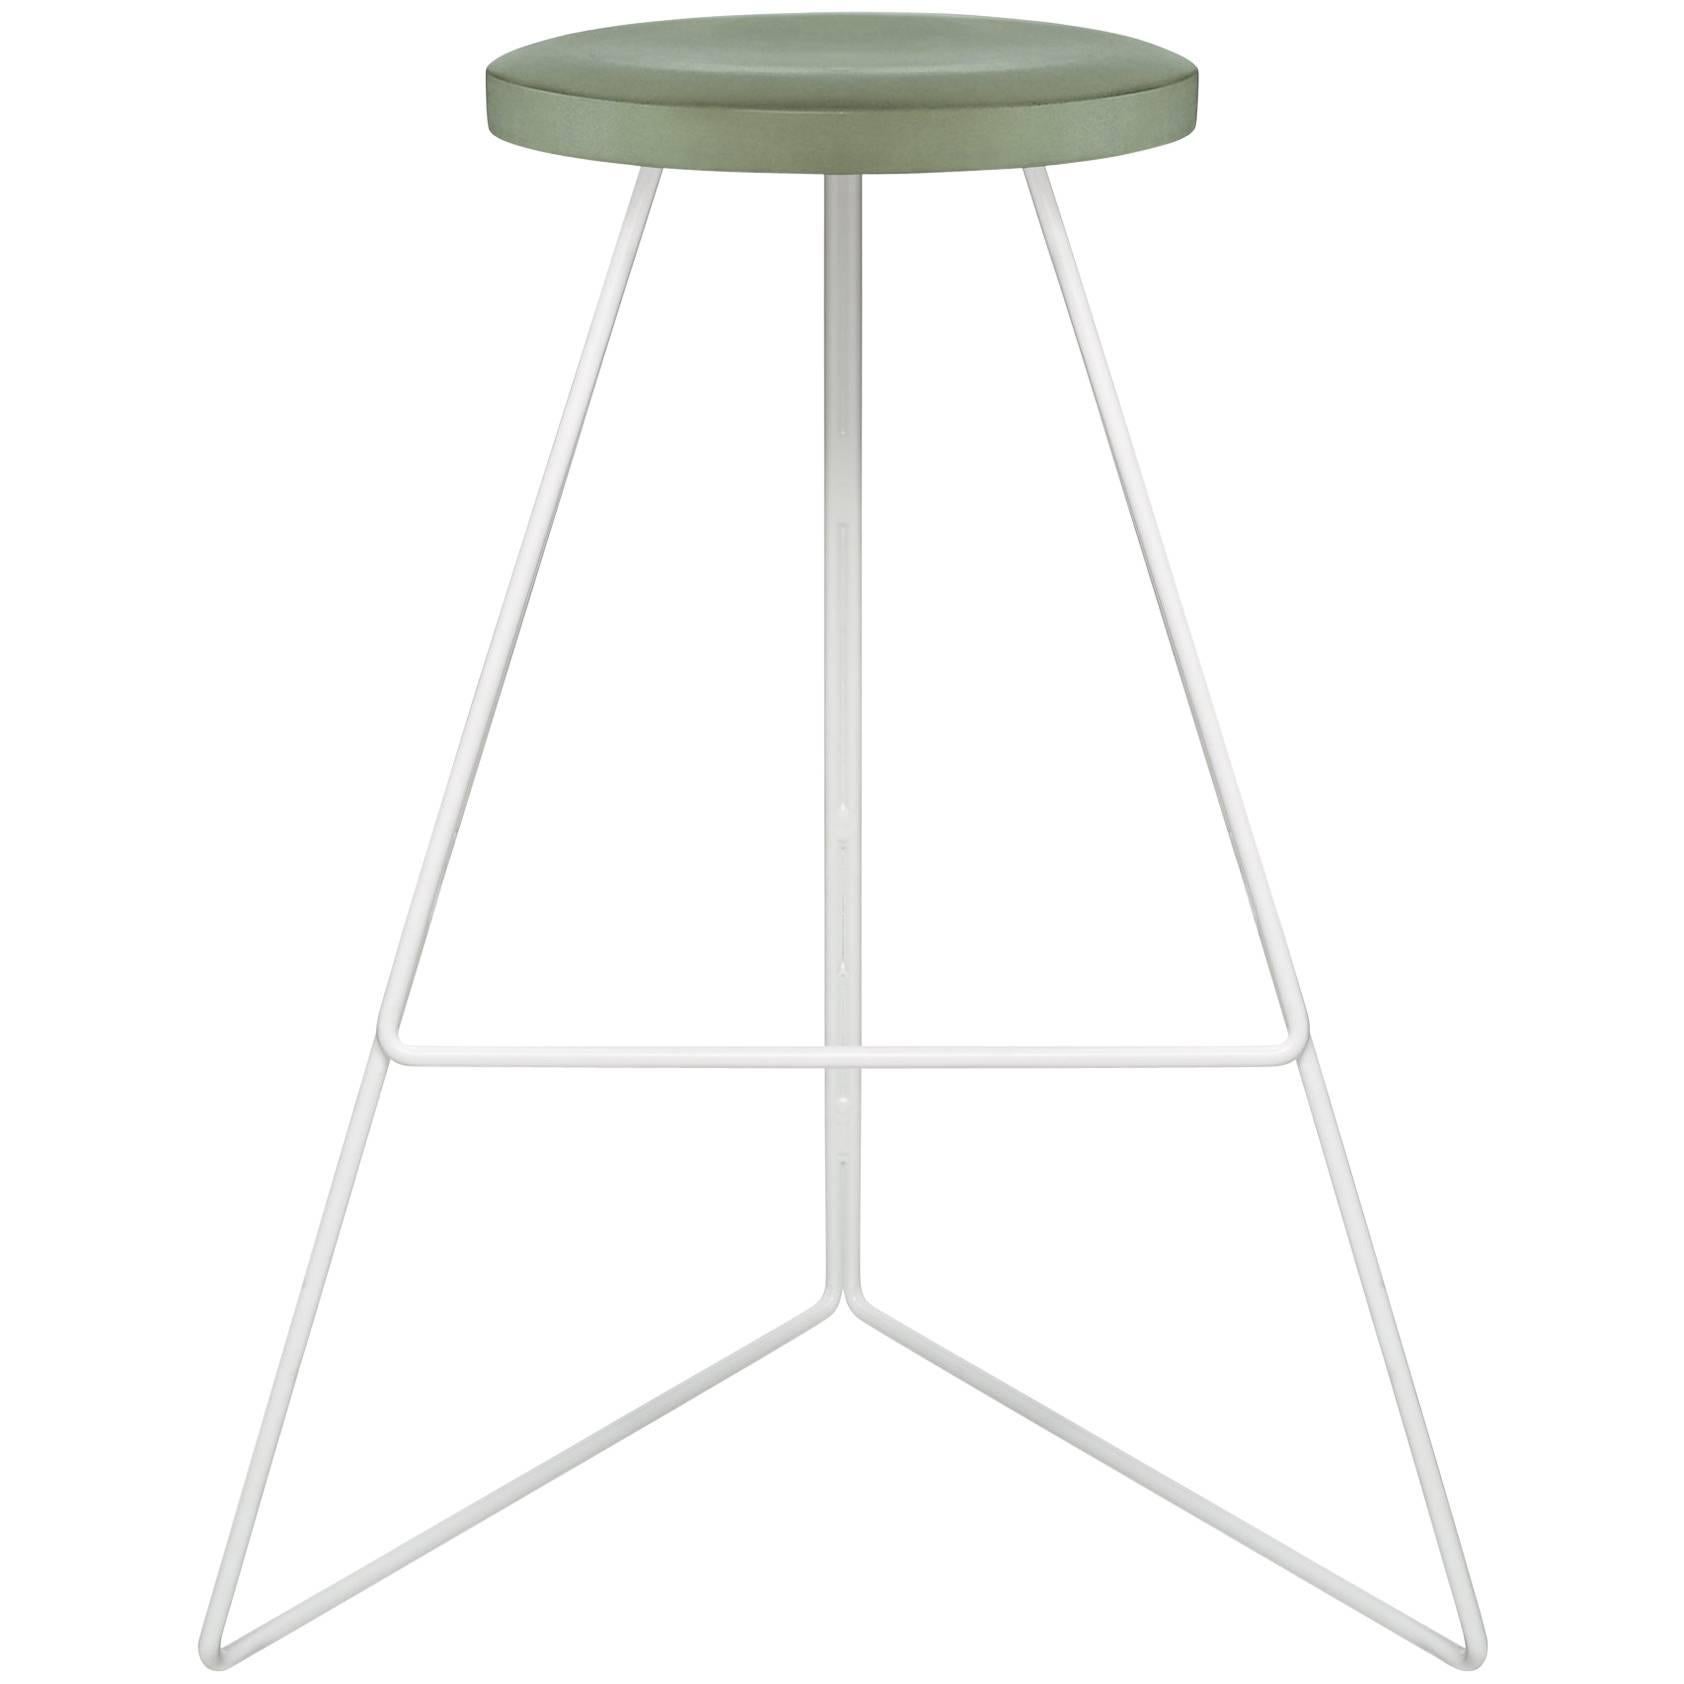 The Coleman stool is a sophisticated design that blends mixed materials, color, and geometry to create a distinctive seating option. First released in 2010, it was awarded a Best Furniture Award from the 2015 Dwell on Design Awards. Each stool is